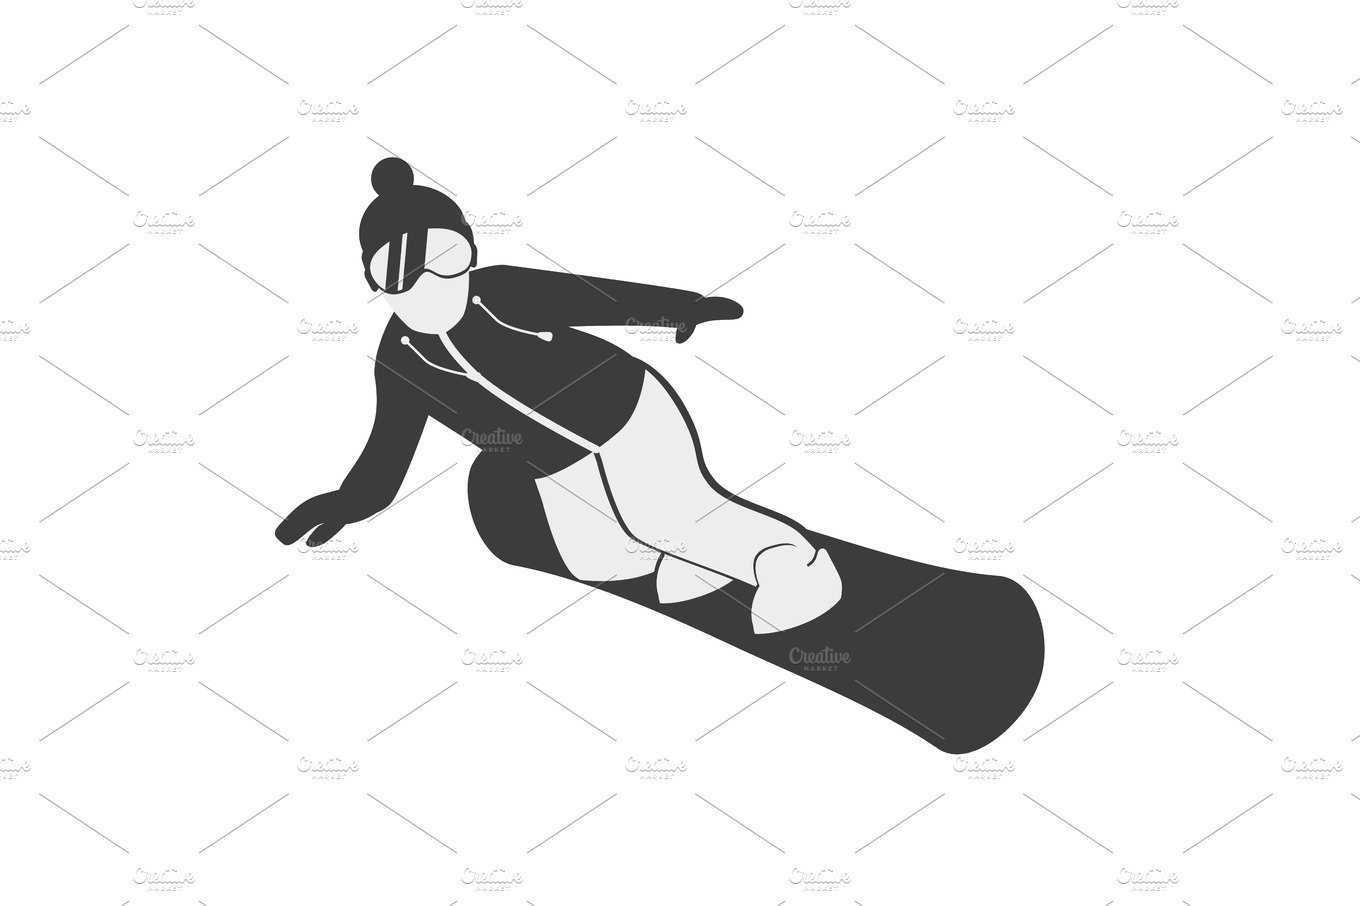 Monochrome illustration with a snowboarder silhouette. cover image.